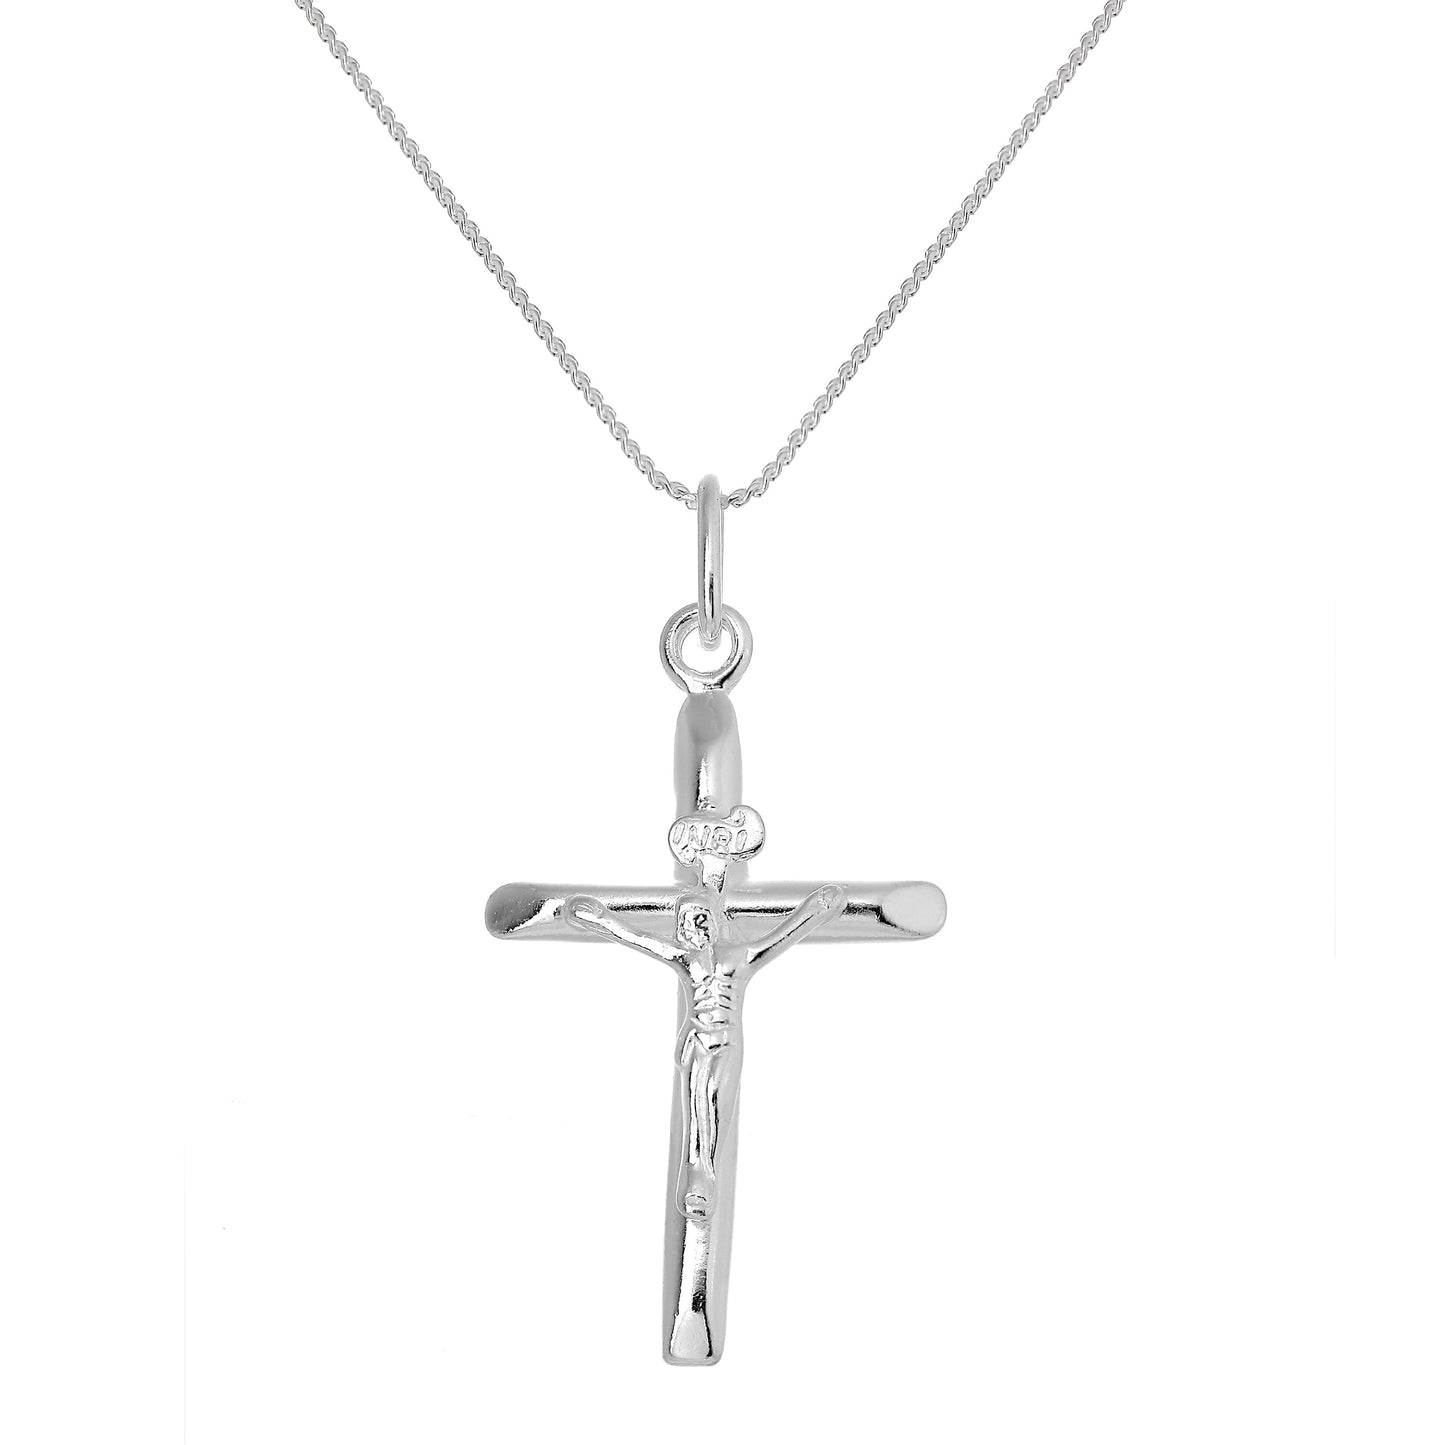 Large Sterling Silver Crucifix Cross Pendant Necklace 16 - 22 Inches